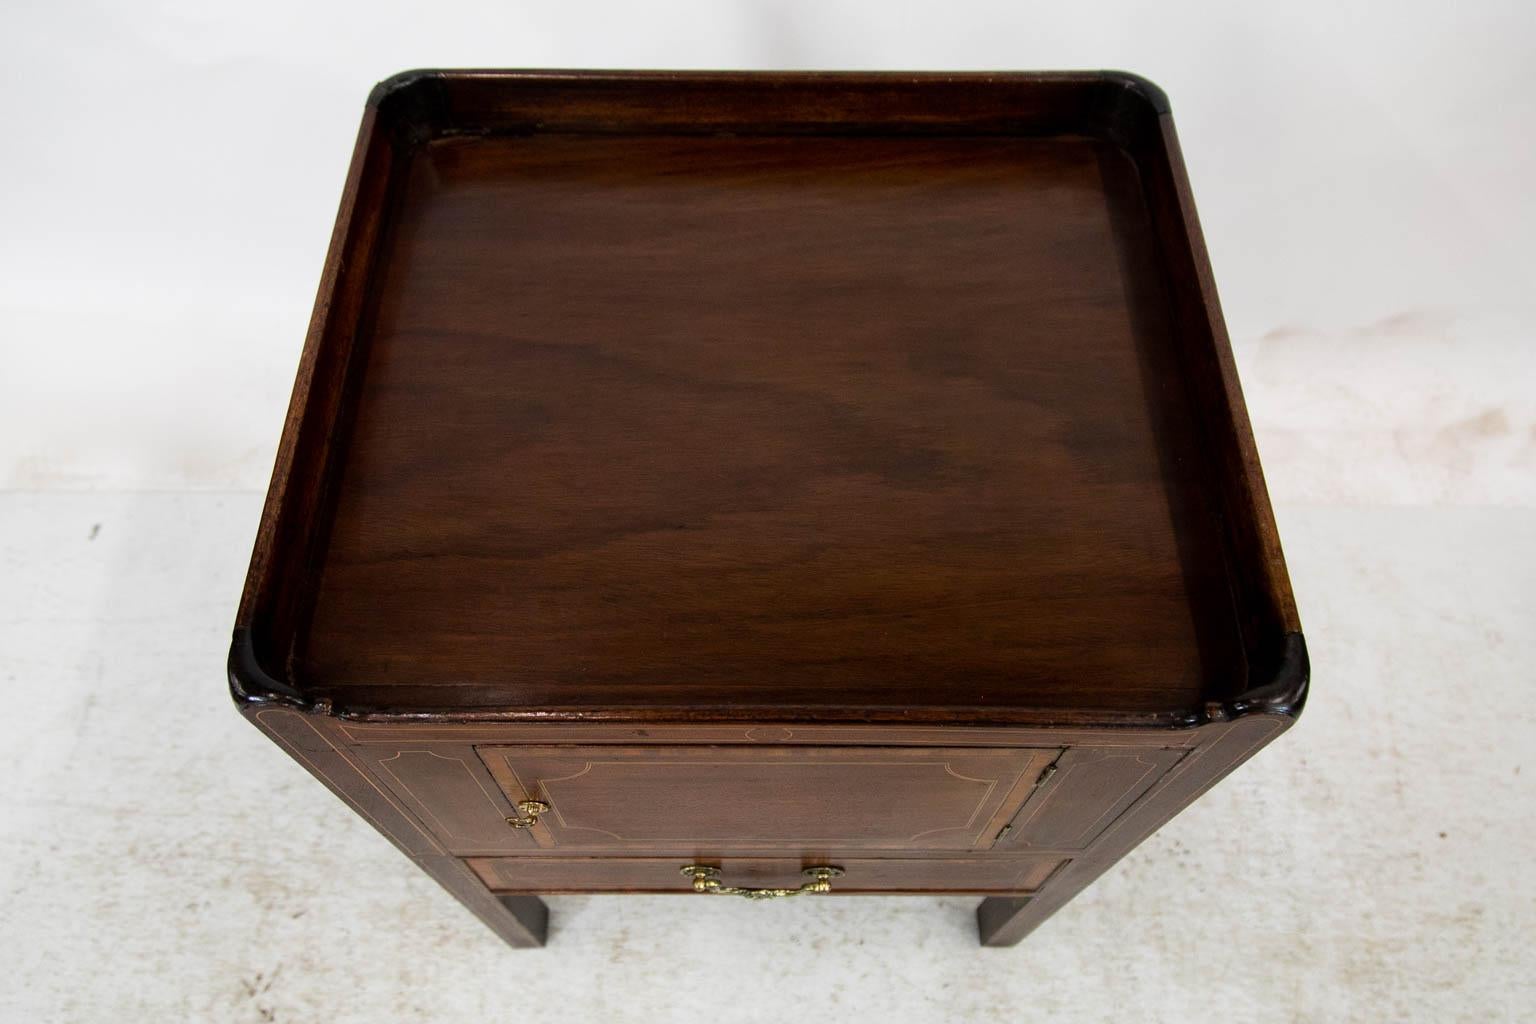 This commode is inlaid and crossbanded with boxwood, ebony, and satinwood. The handles are later. The lower pullout compartment has been converted to a drawer.